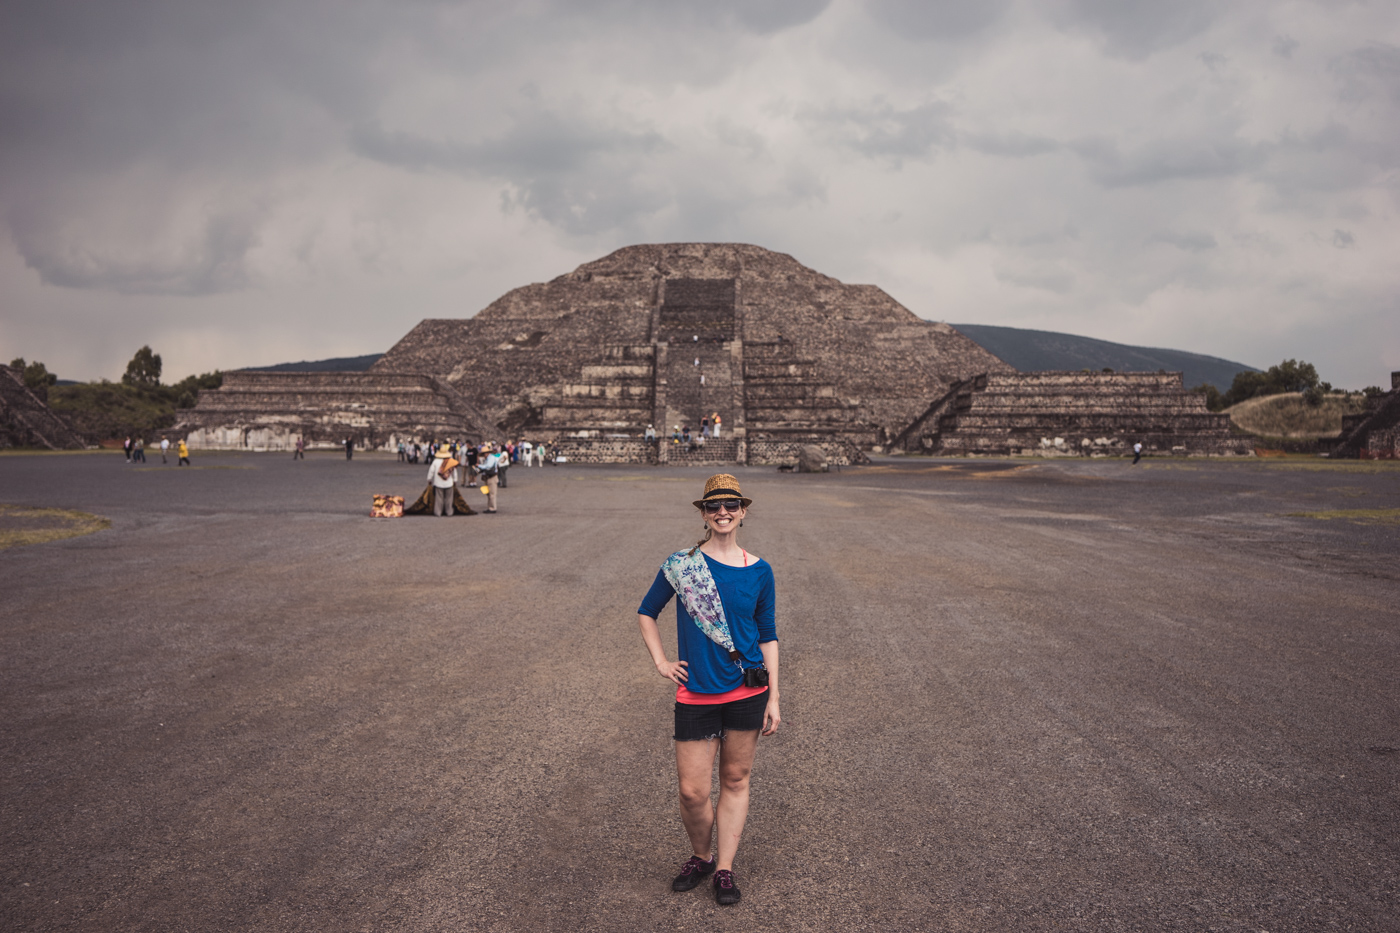 Avenue of the Dead at Teotihuacán, view of Pyramid of the Moon